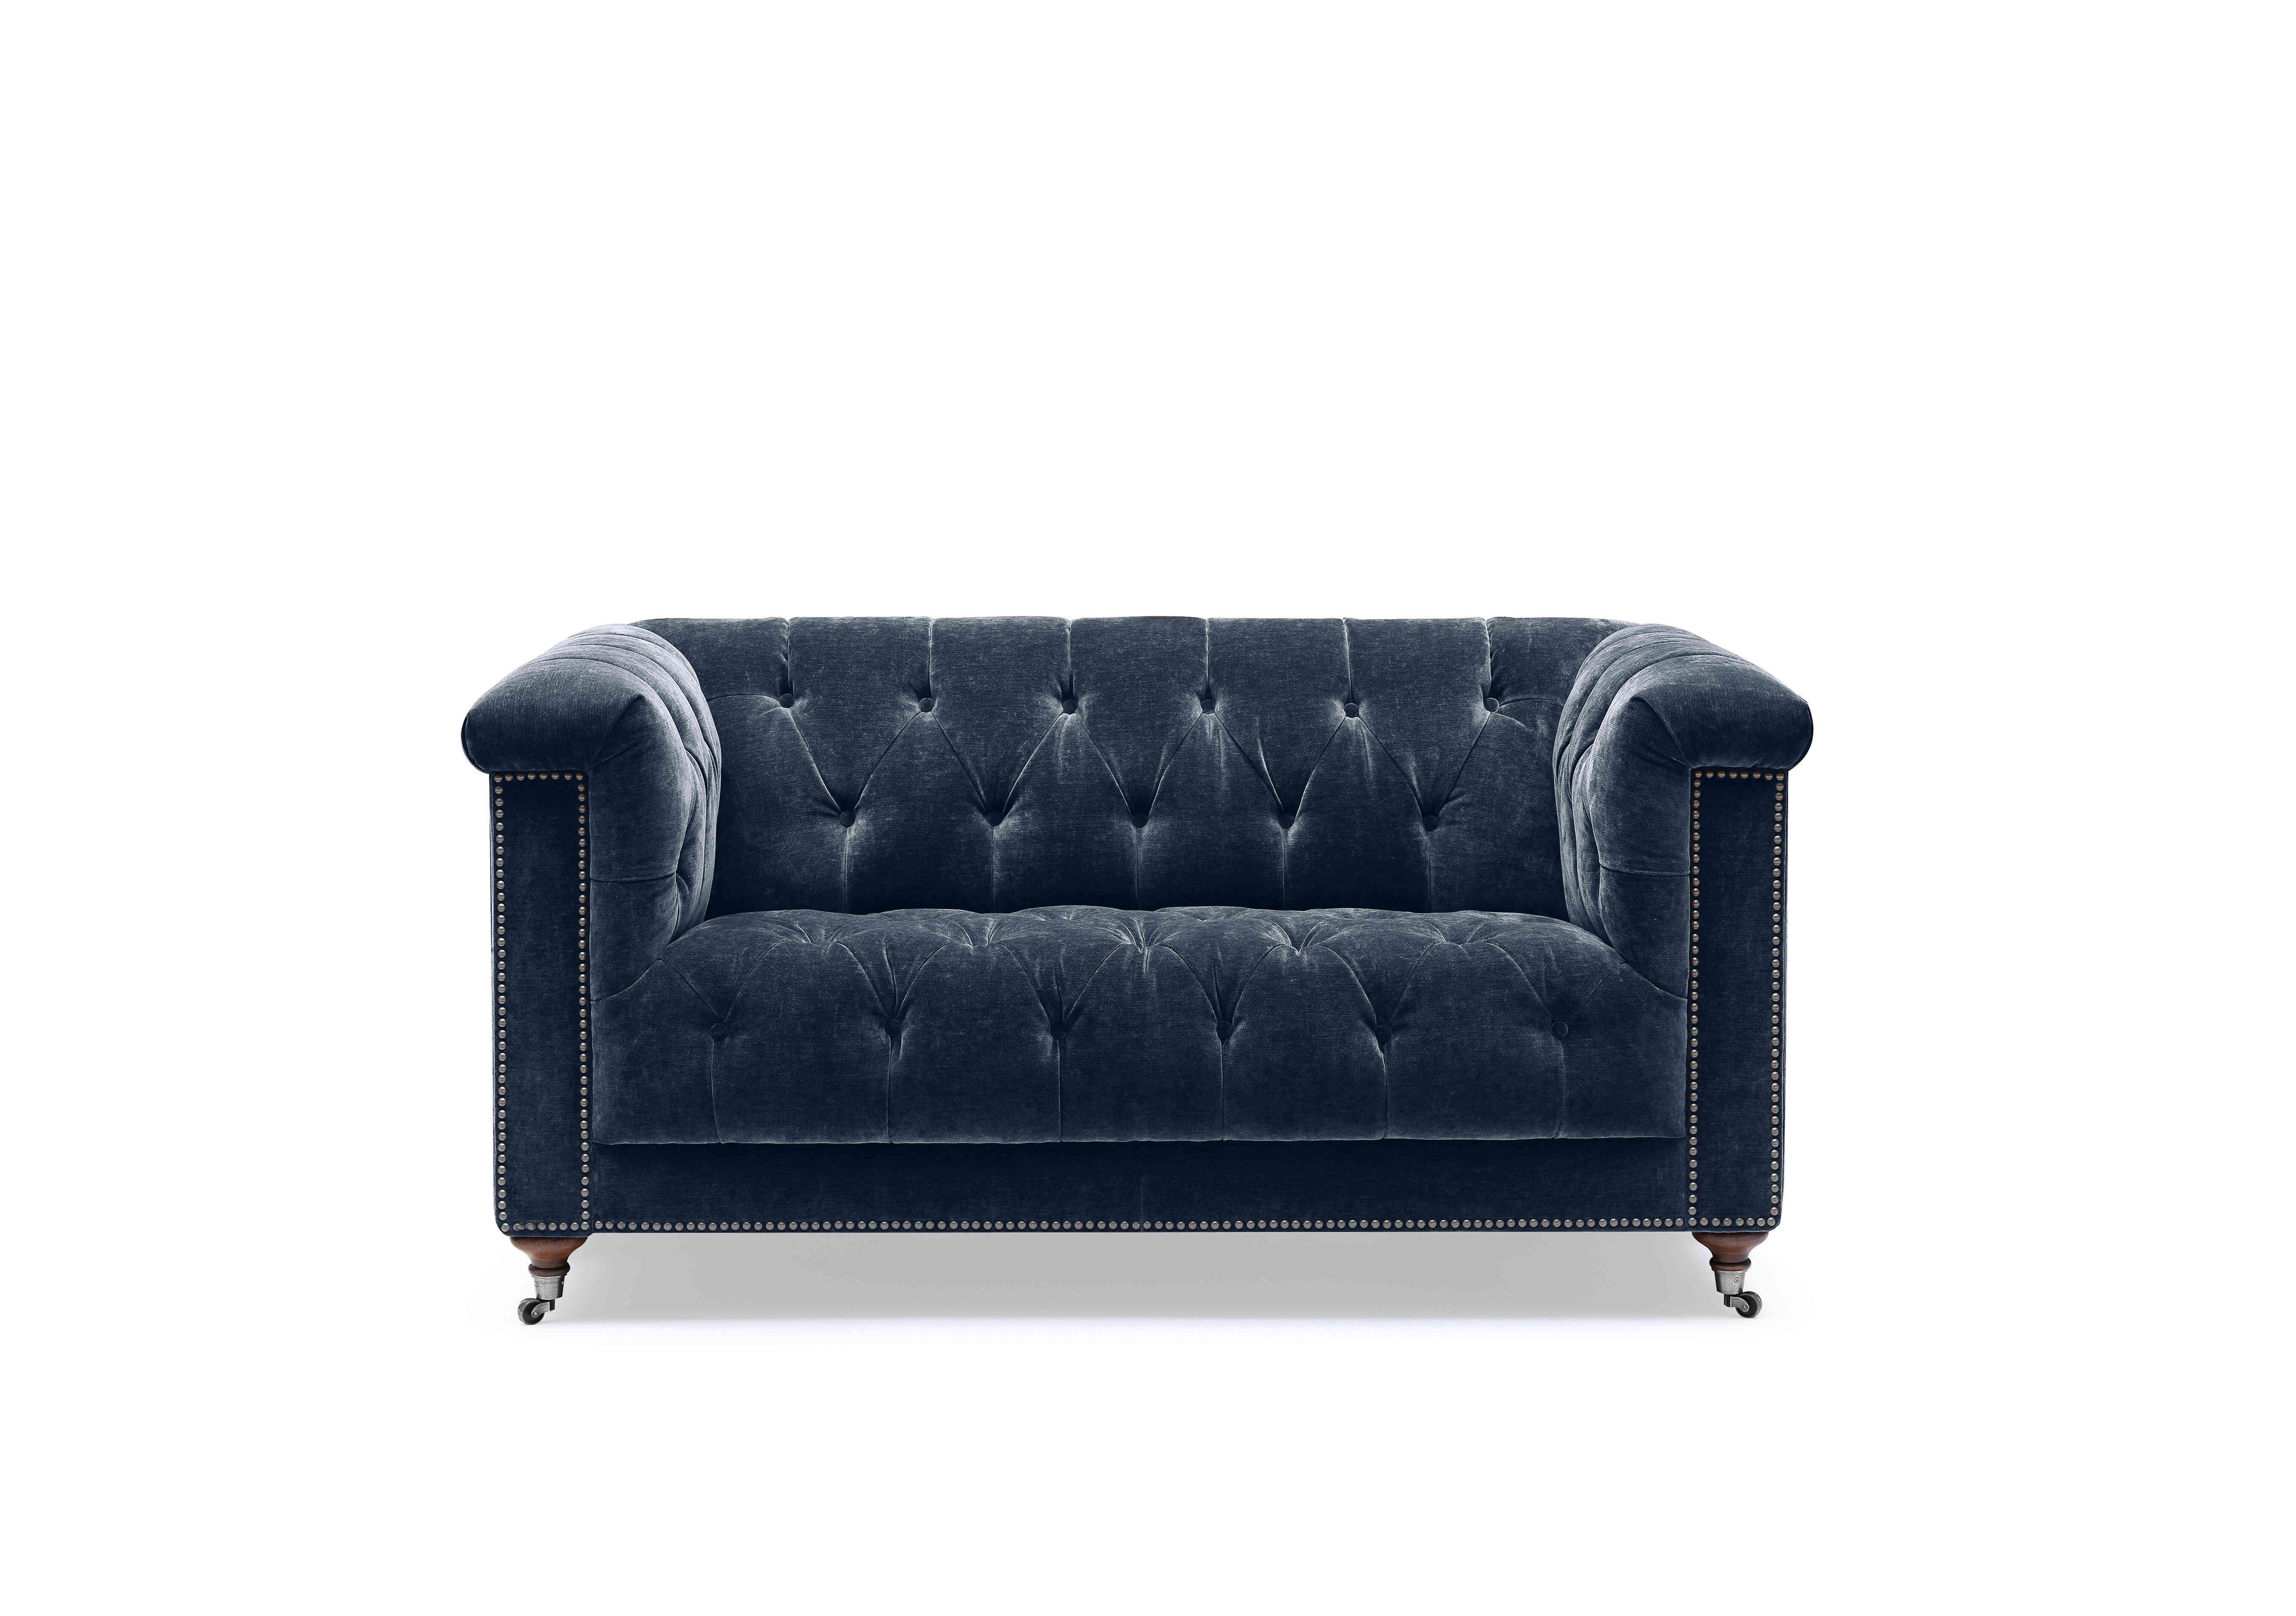 Wallace 2 Seater Fabric Chesterfield Sofa with USB-C in X3y2-W024 Midnight on Furniture Village